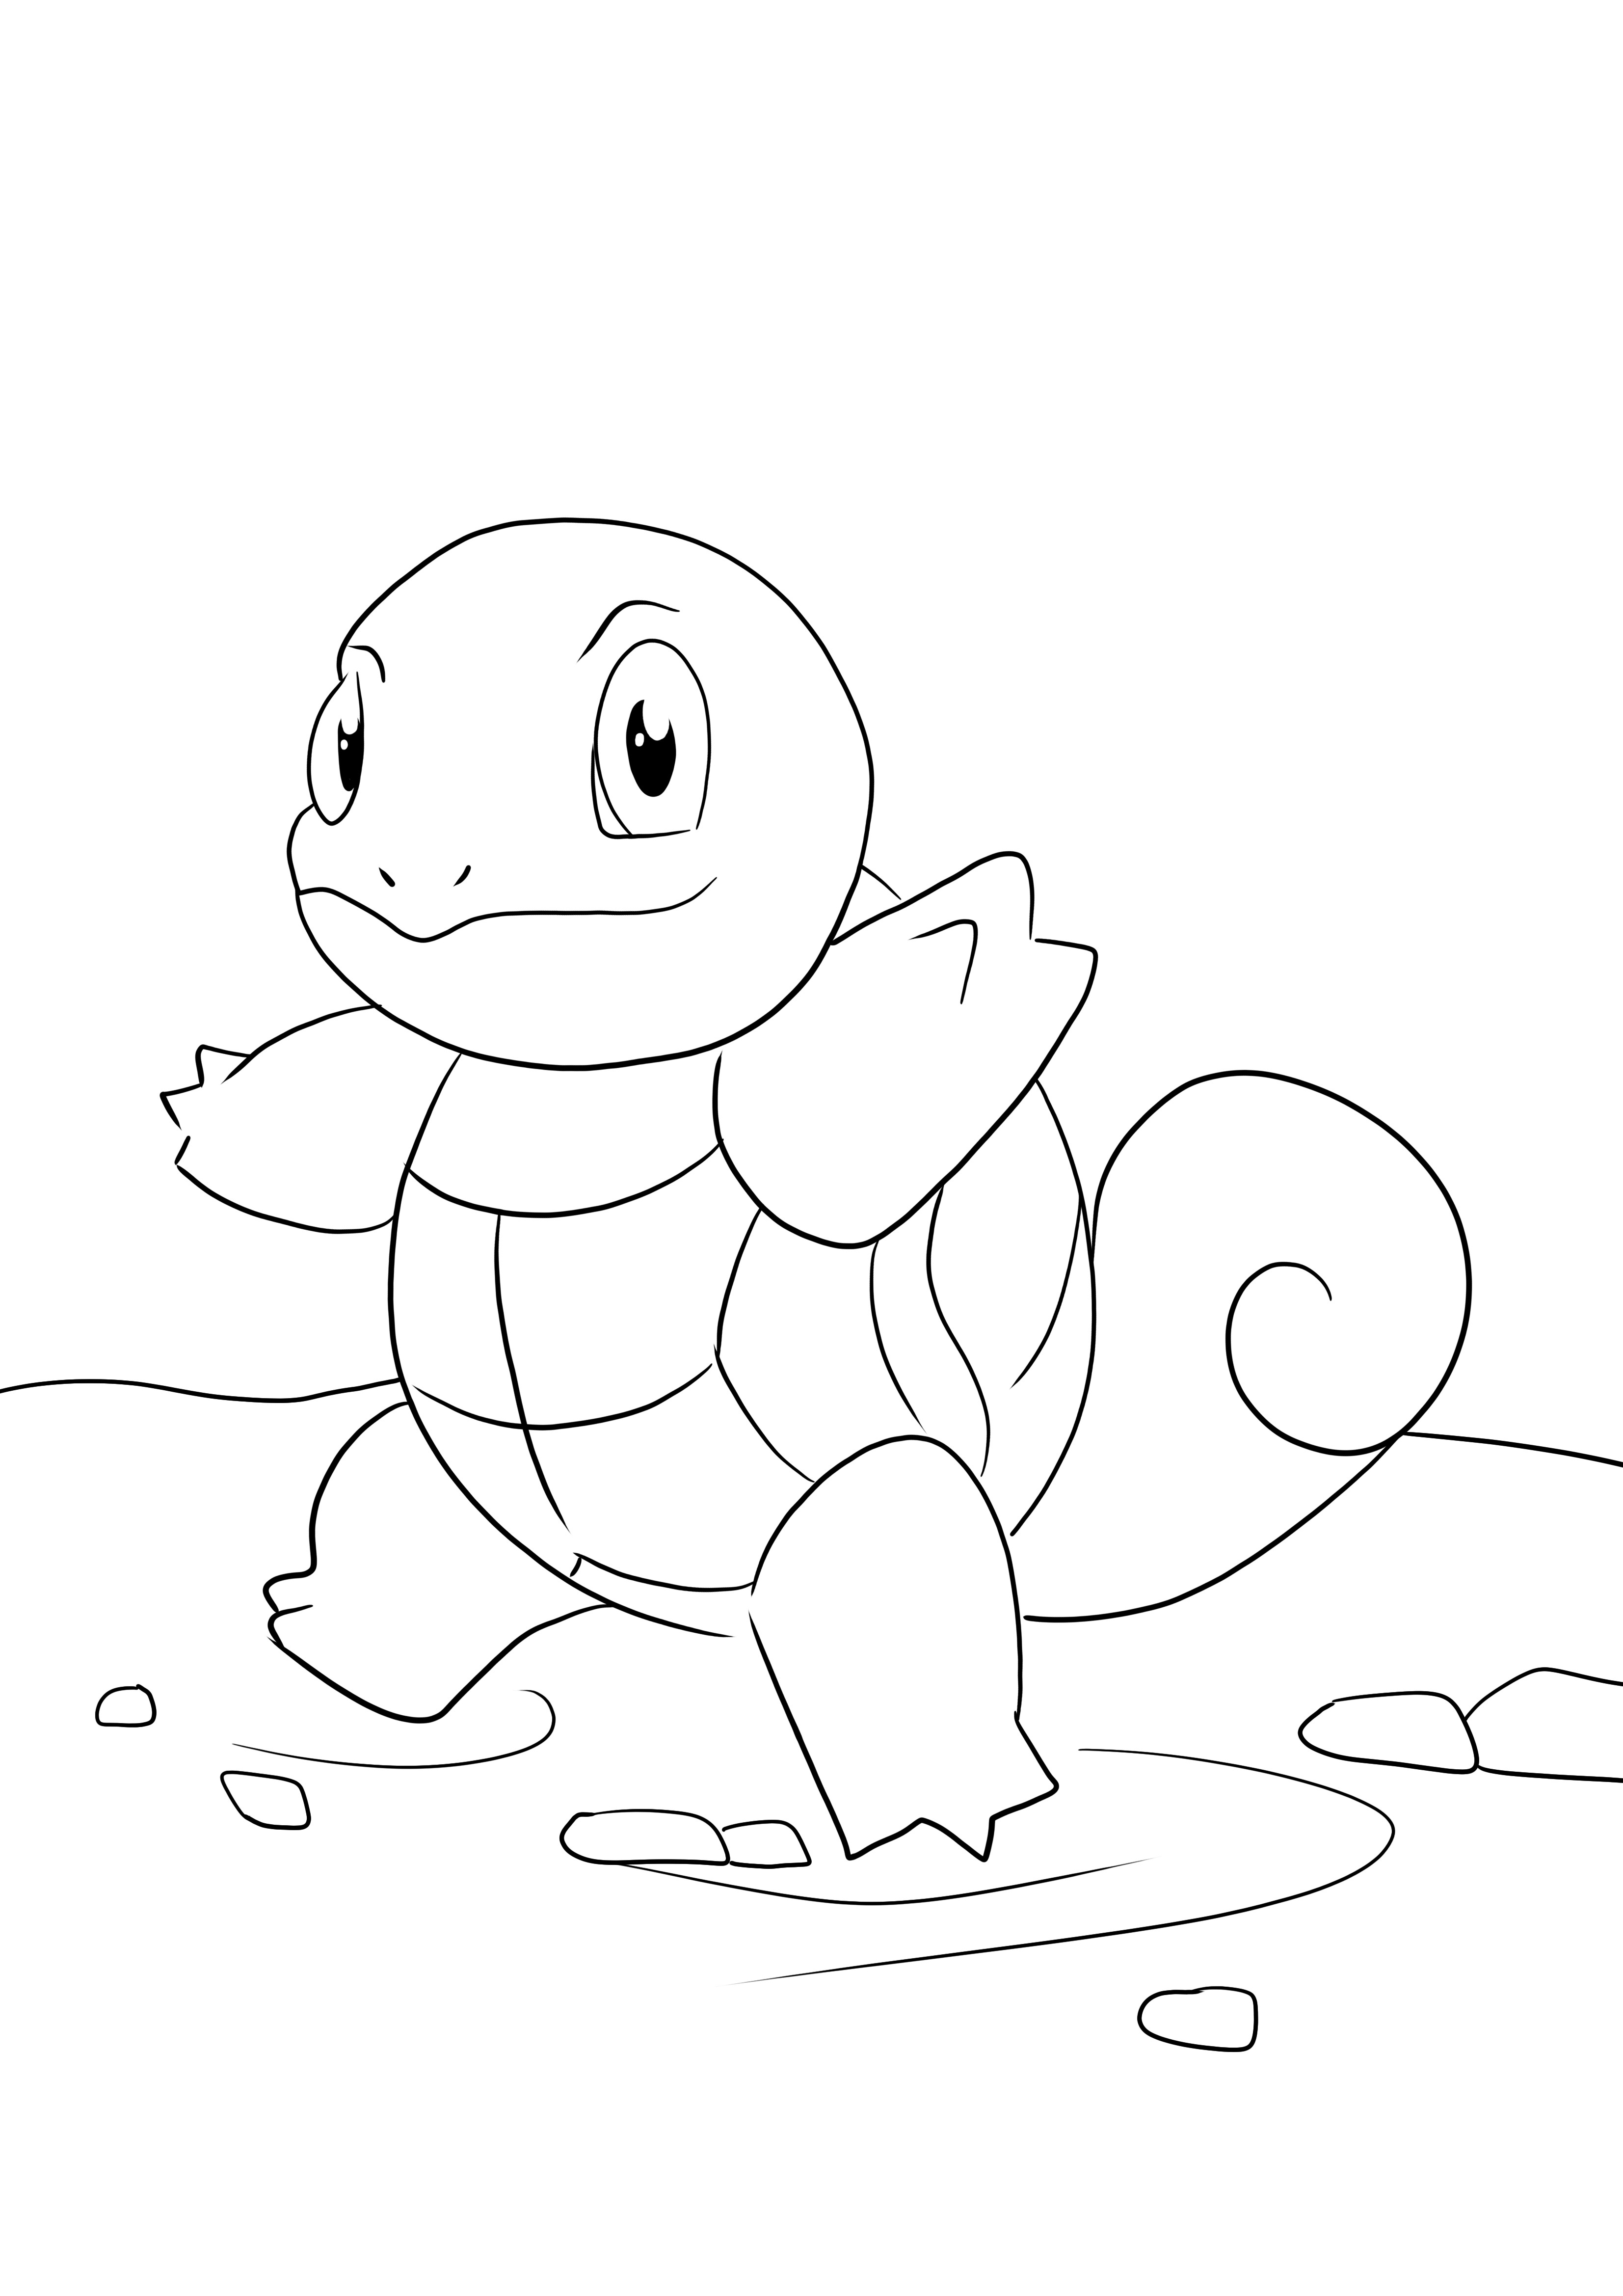 Squirtle coloring image for kids for free